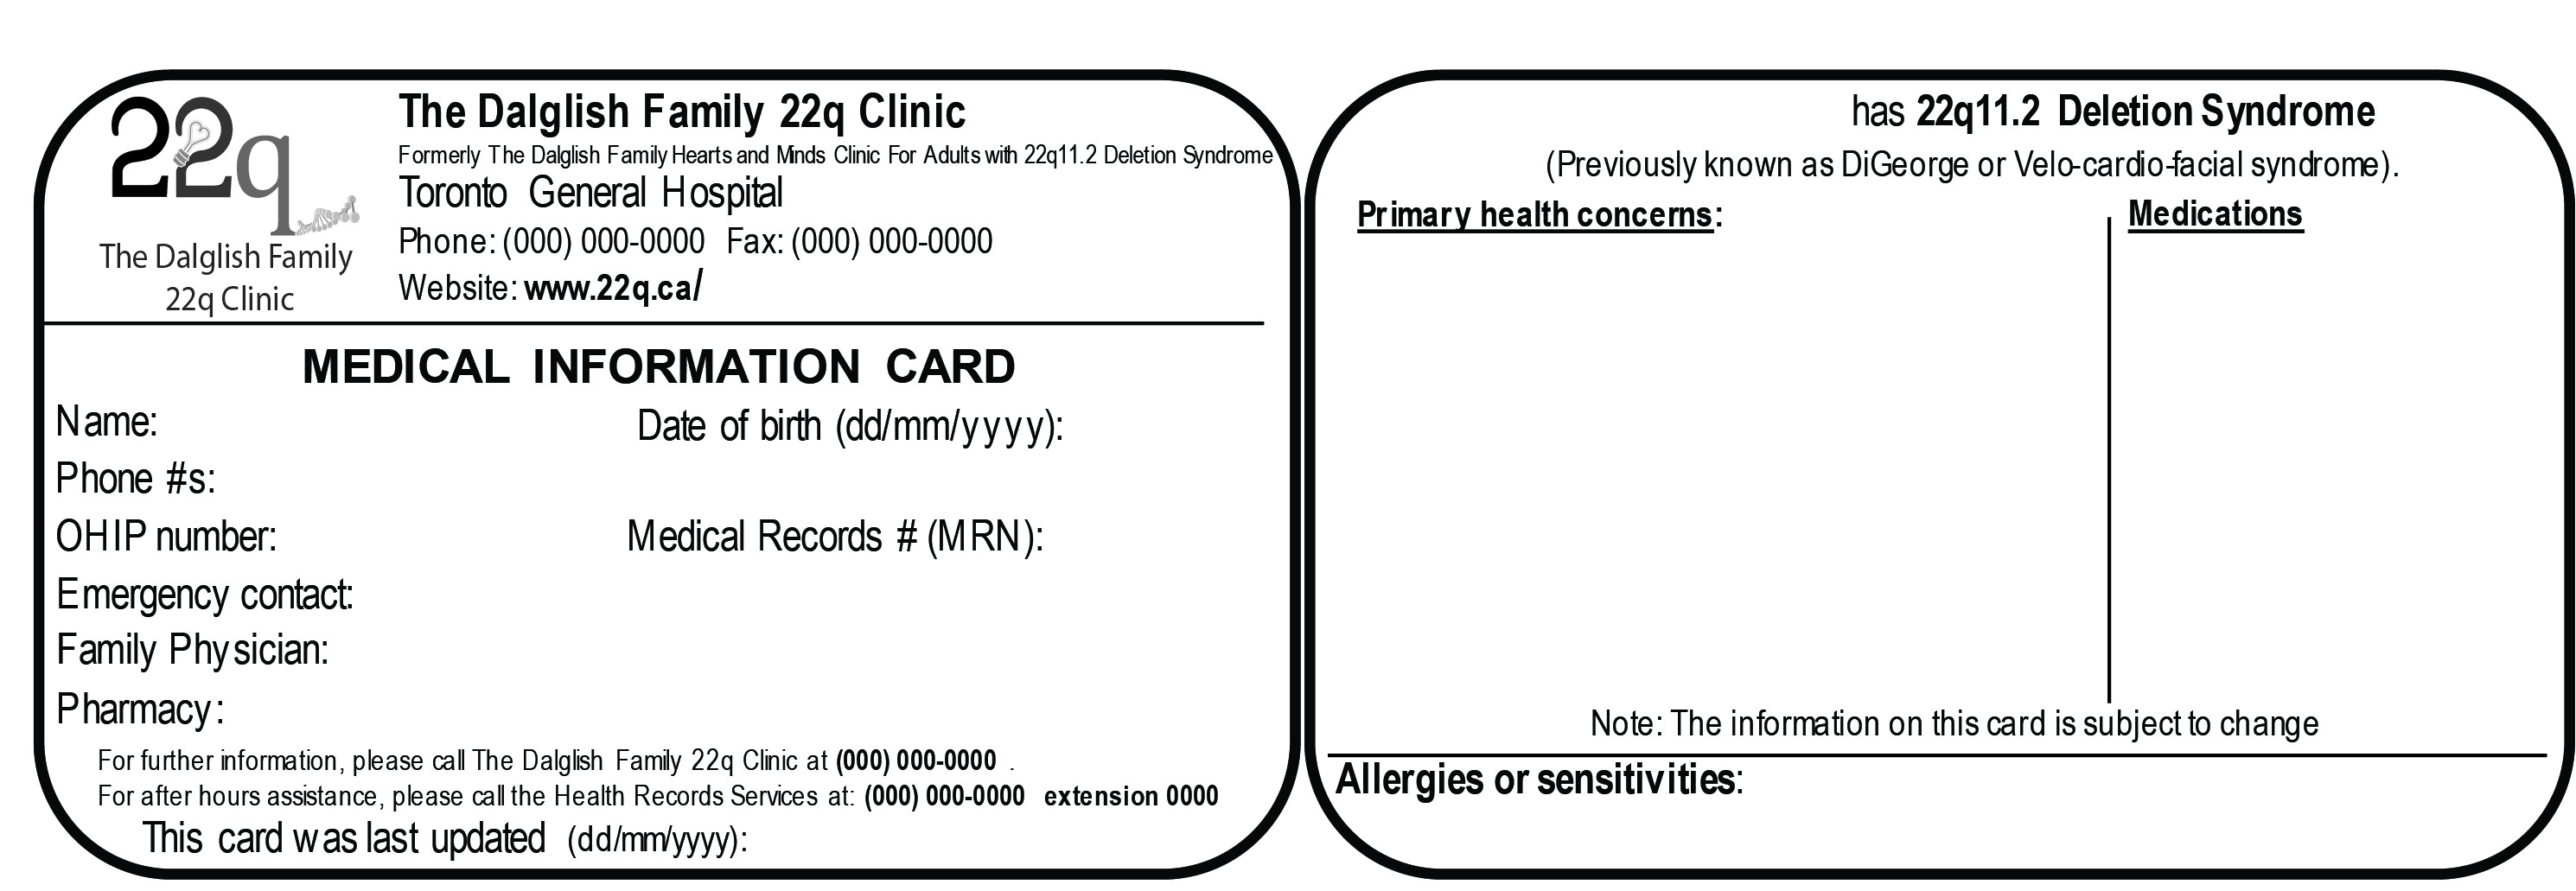 personalized medical information card from Dalglish Family 22q Clinic